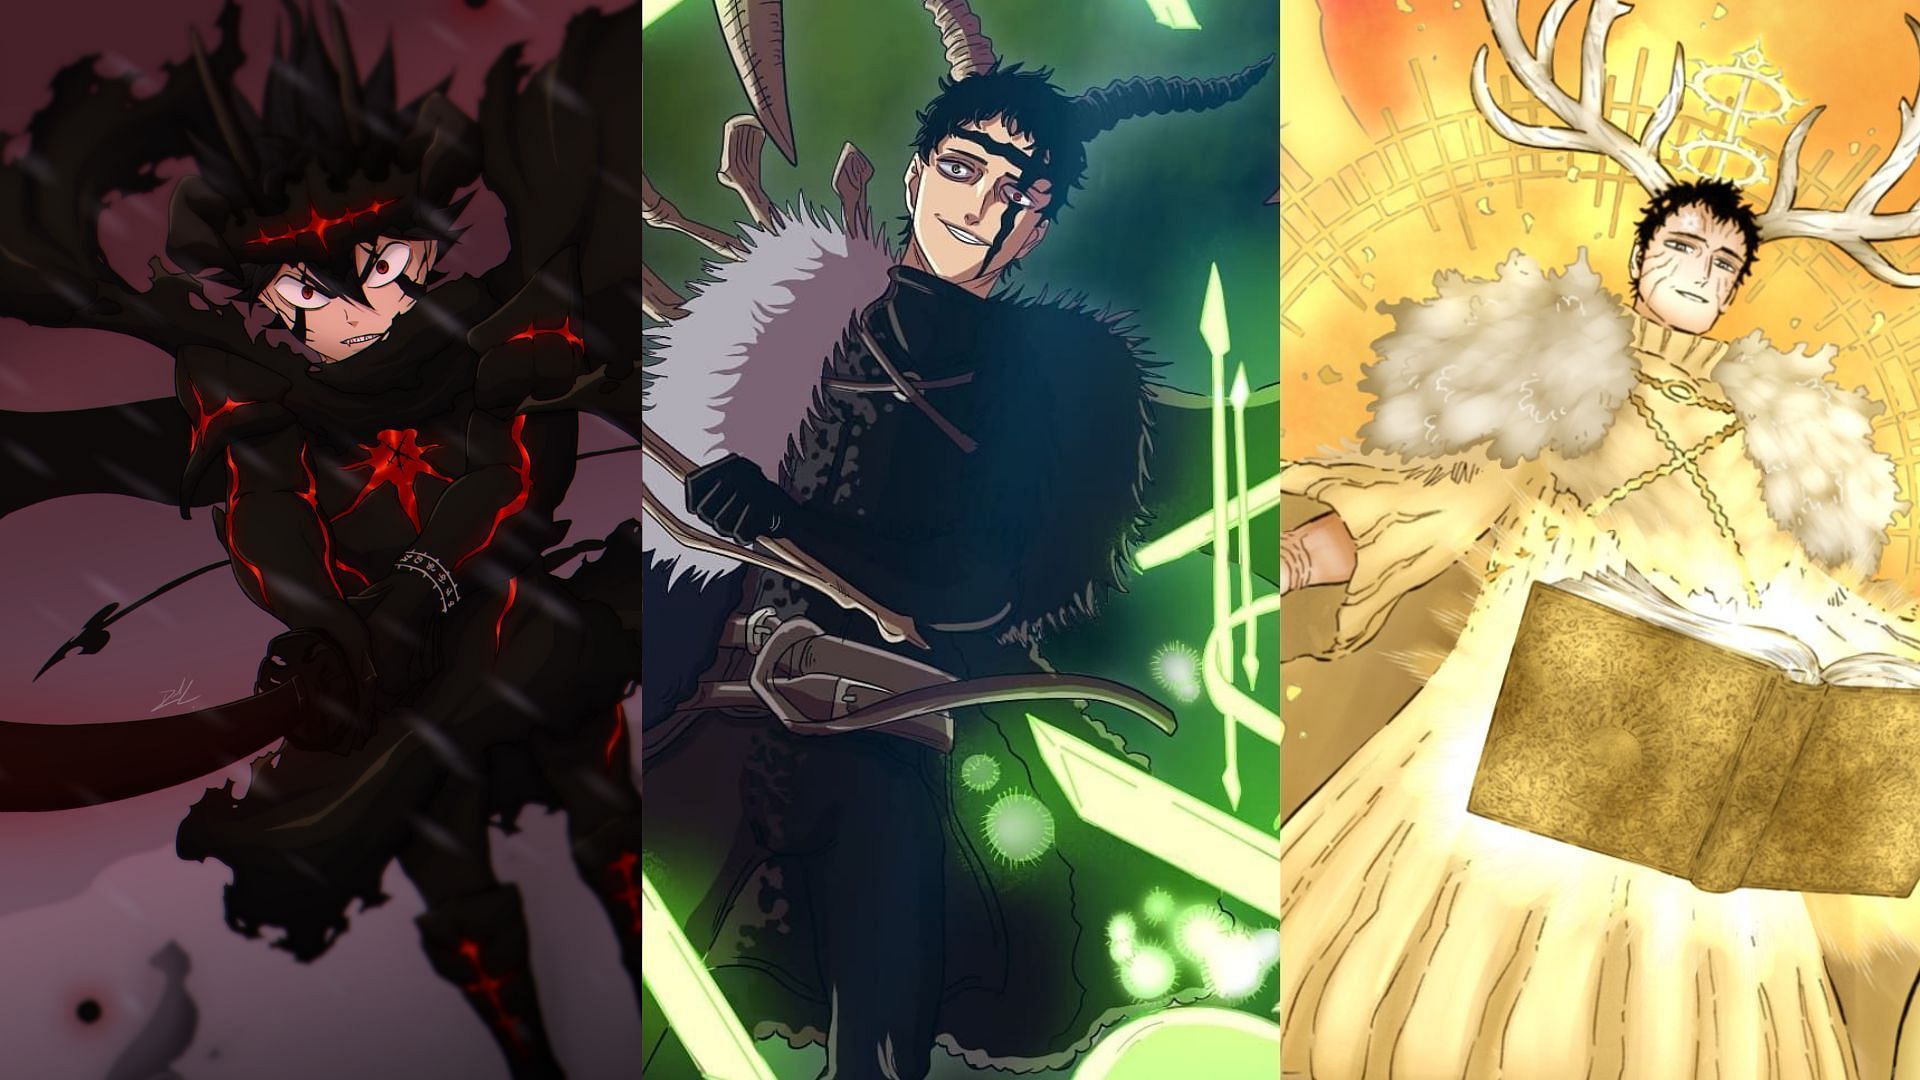 Black Clover: Every Devil Host, ranked weakest to strongest